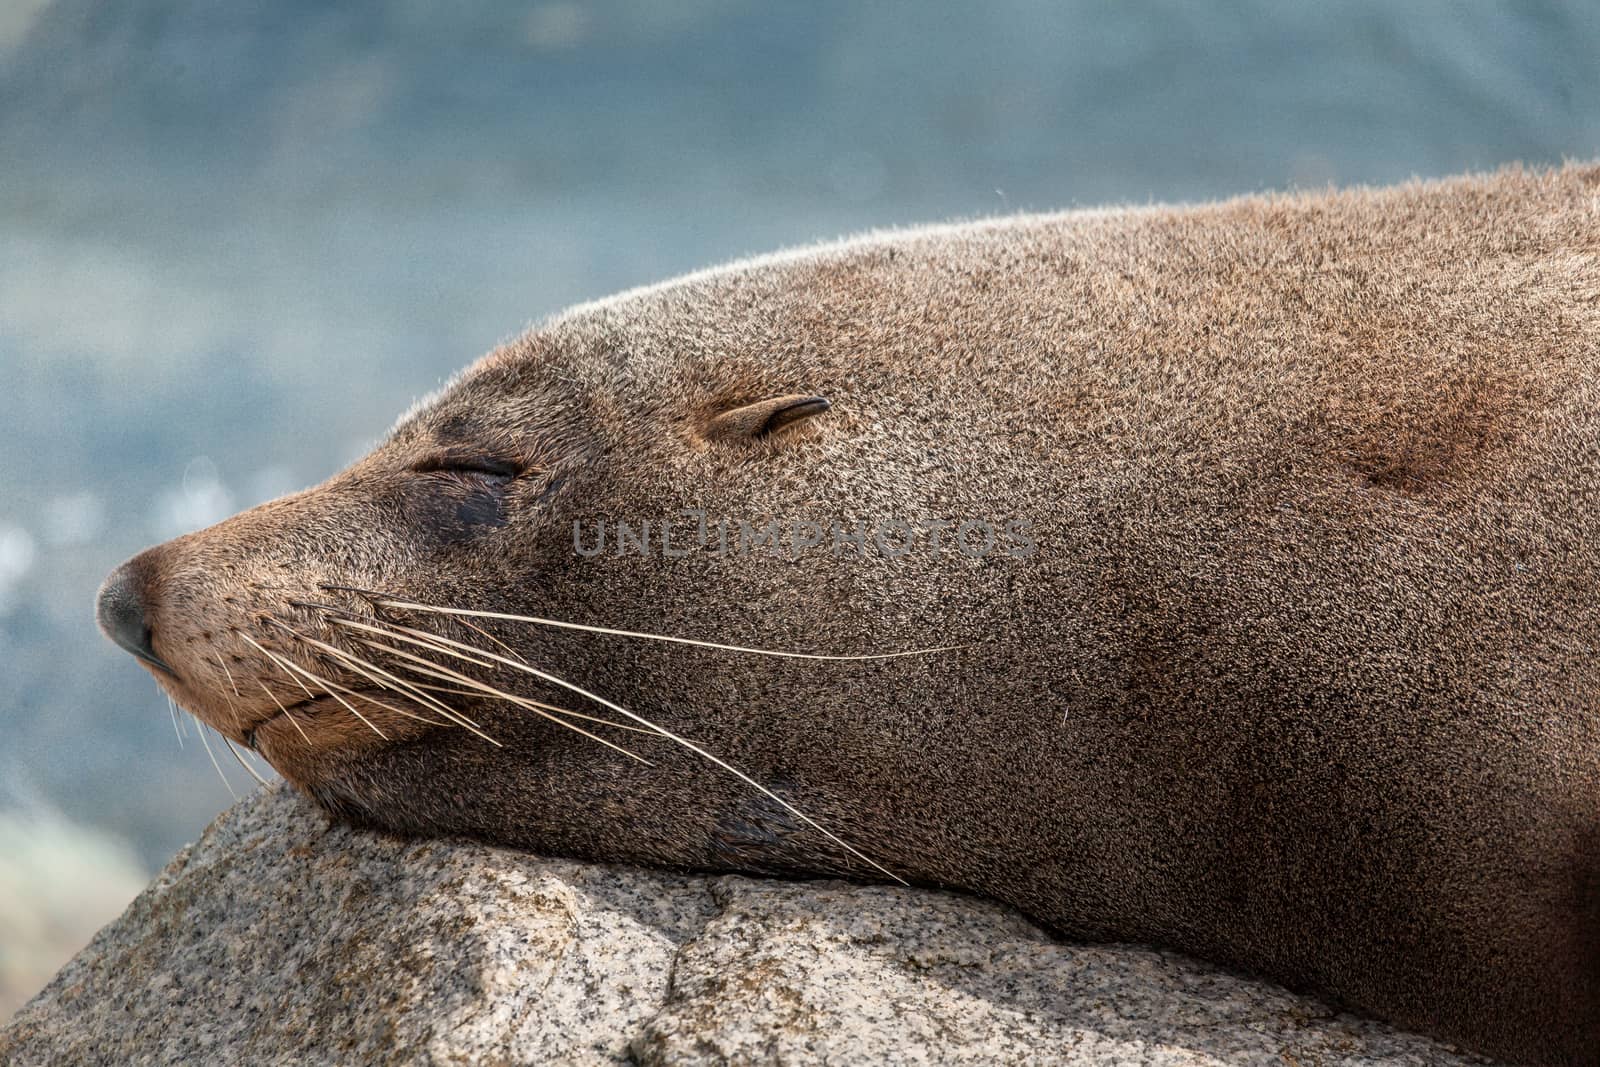 Sleeping seal rests on a rock after a feed by lovleah